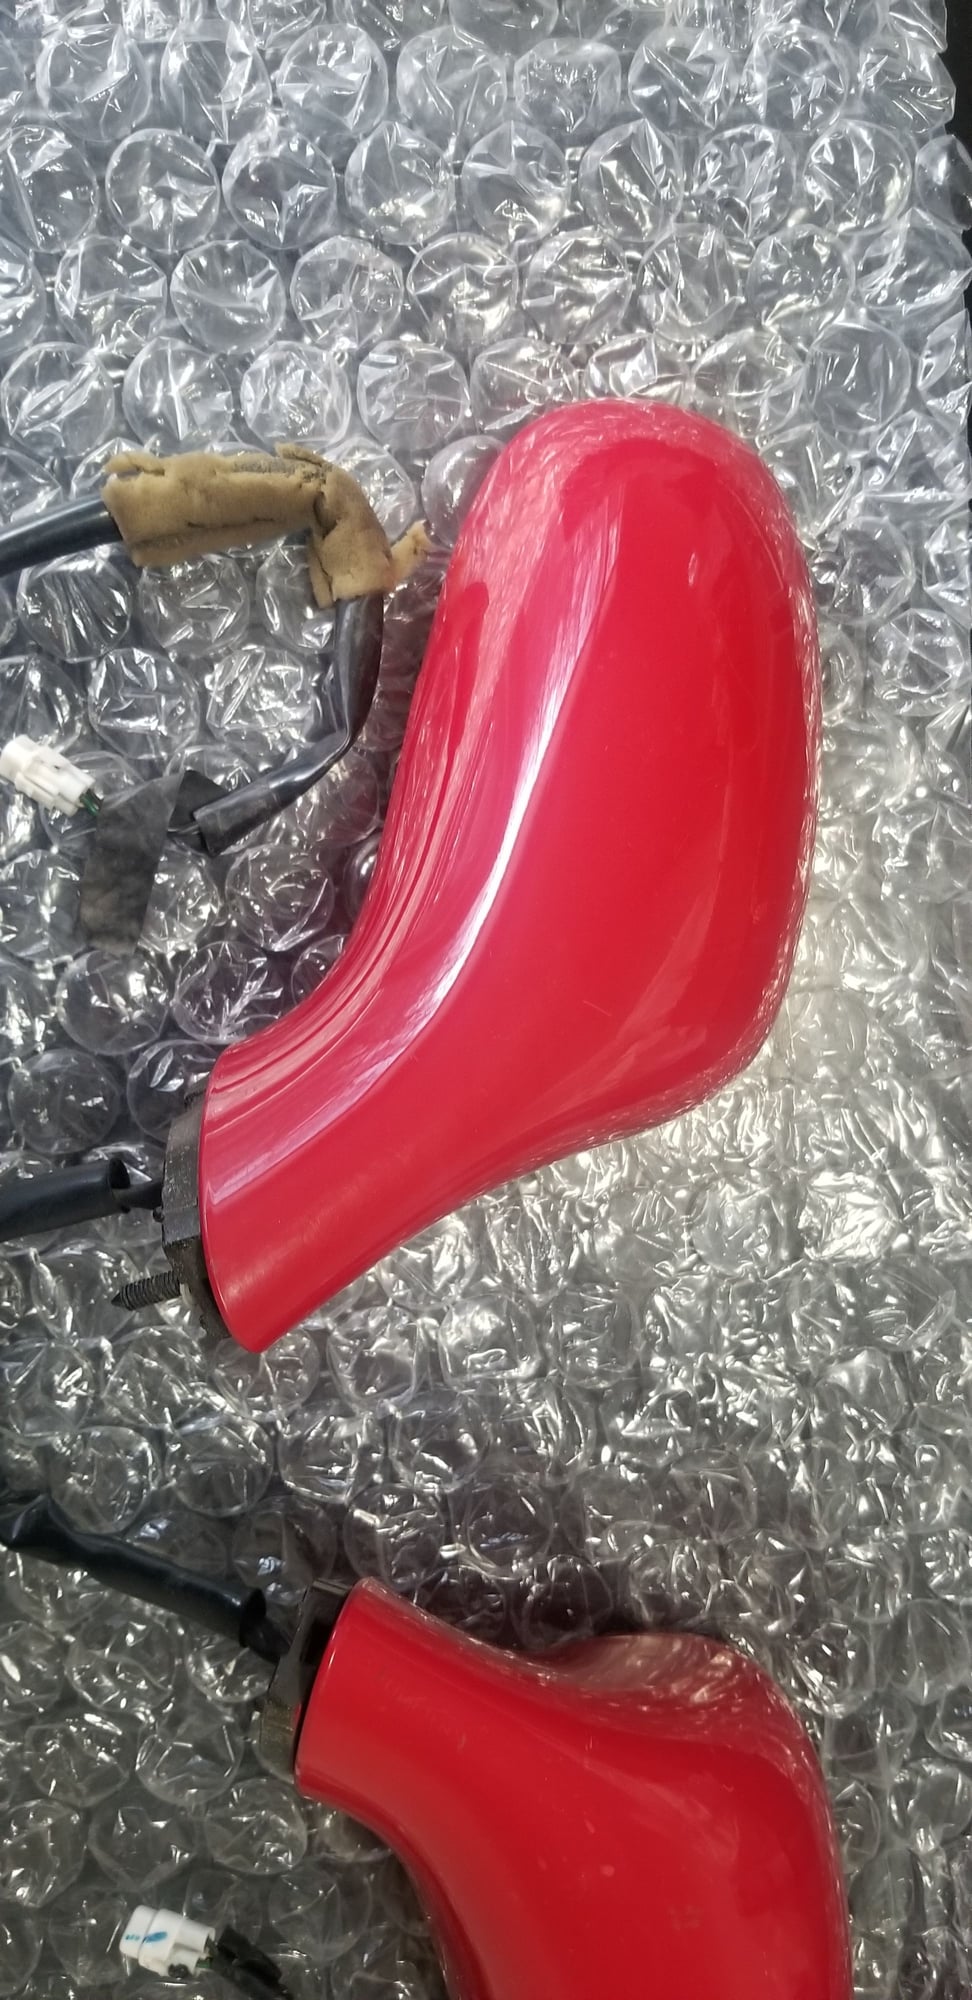 Exterior Body Parts - OEM Side Mirrors with JDM Glass in VR - Used - 1993 to 2001 Mazda RX-7 - Germantown, MD 20874, United States